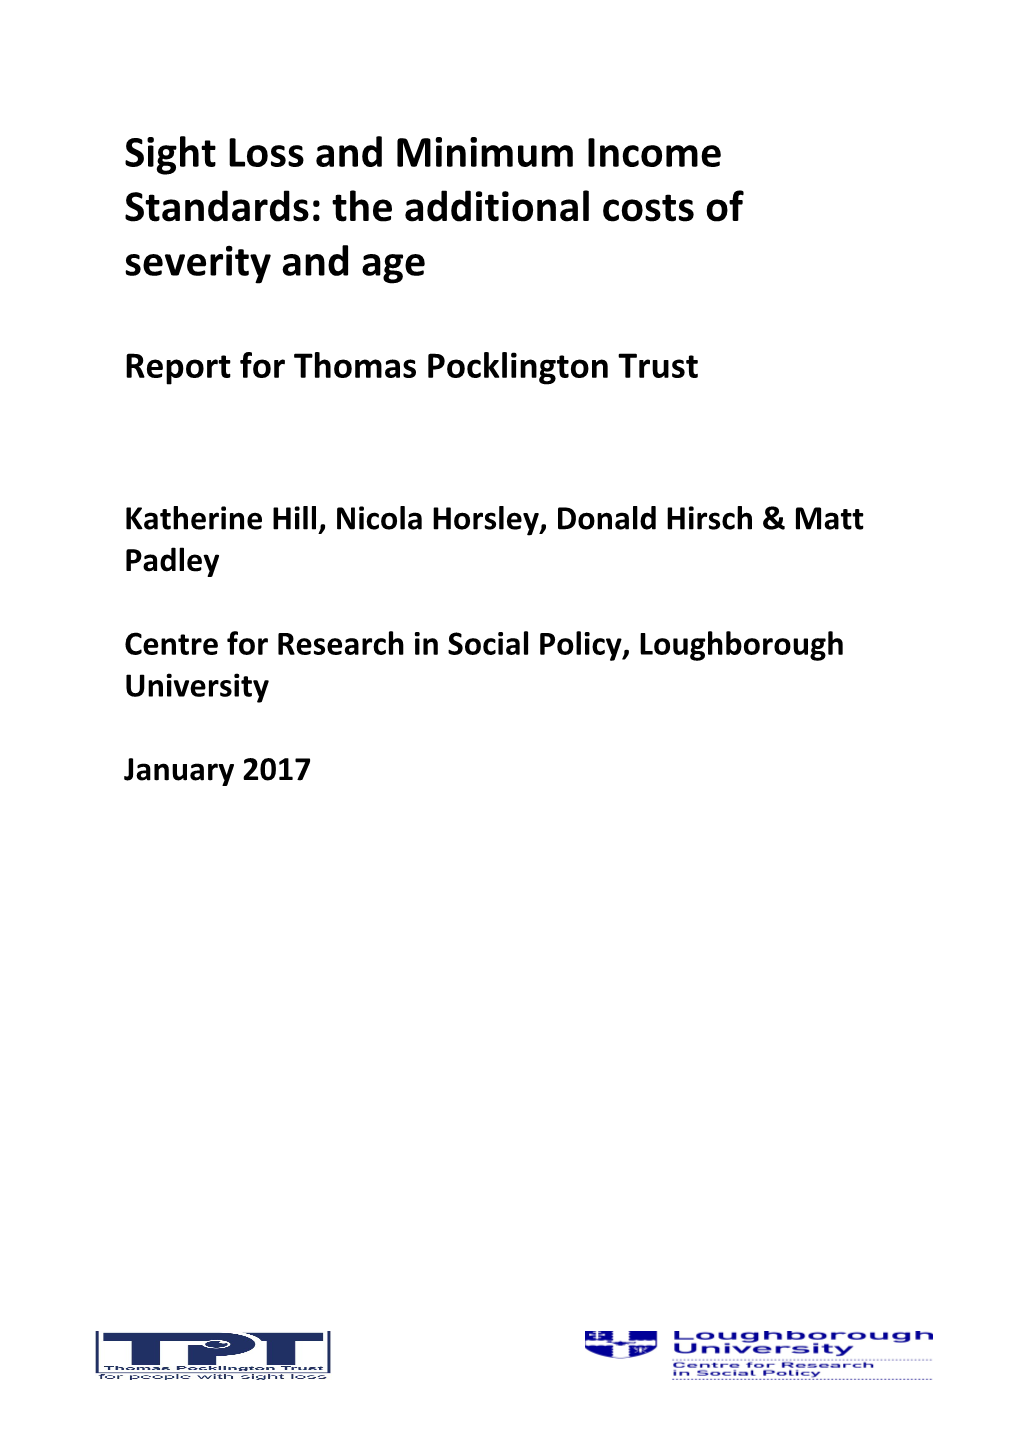 Sight Loss and Minimum Income Standards: the Additional Costs of Severity and Age